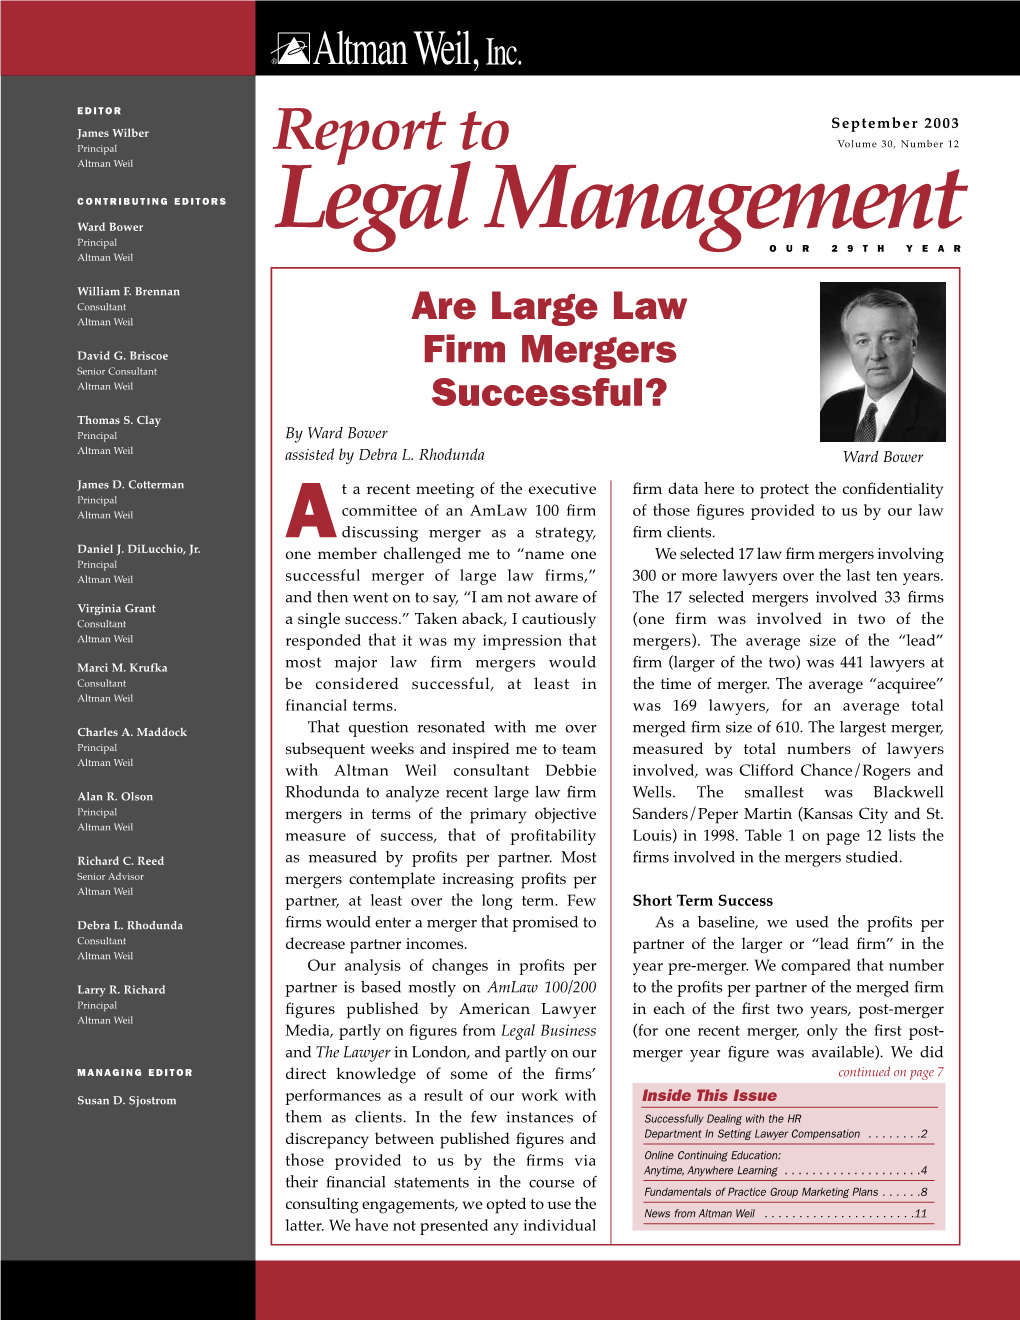 Are Large Law Firm Mergers Successful?